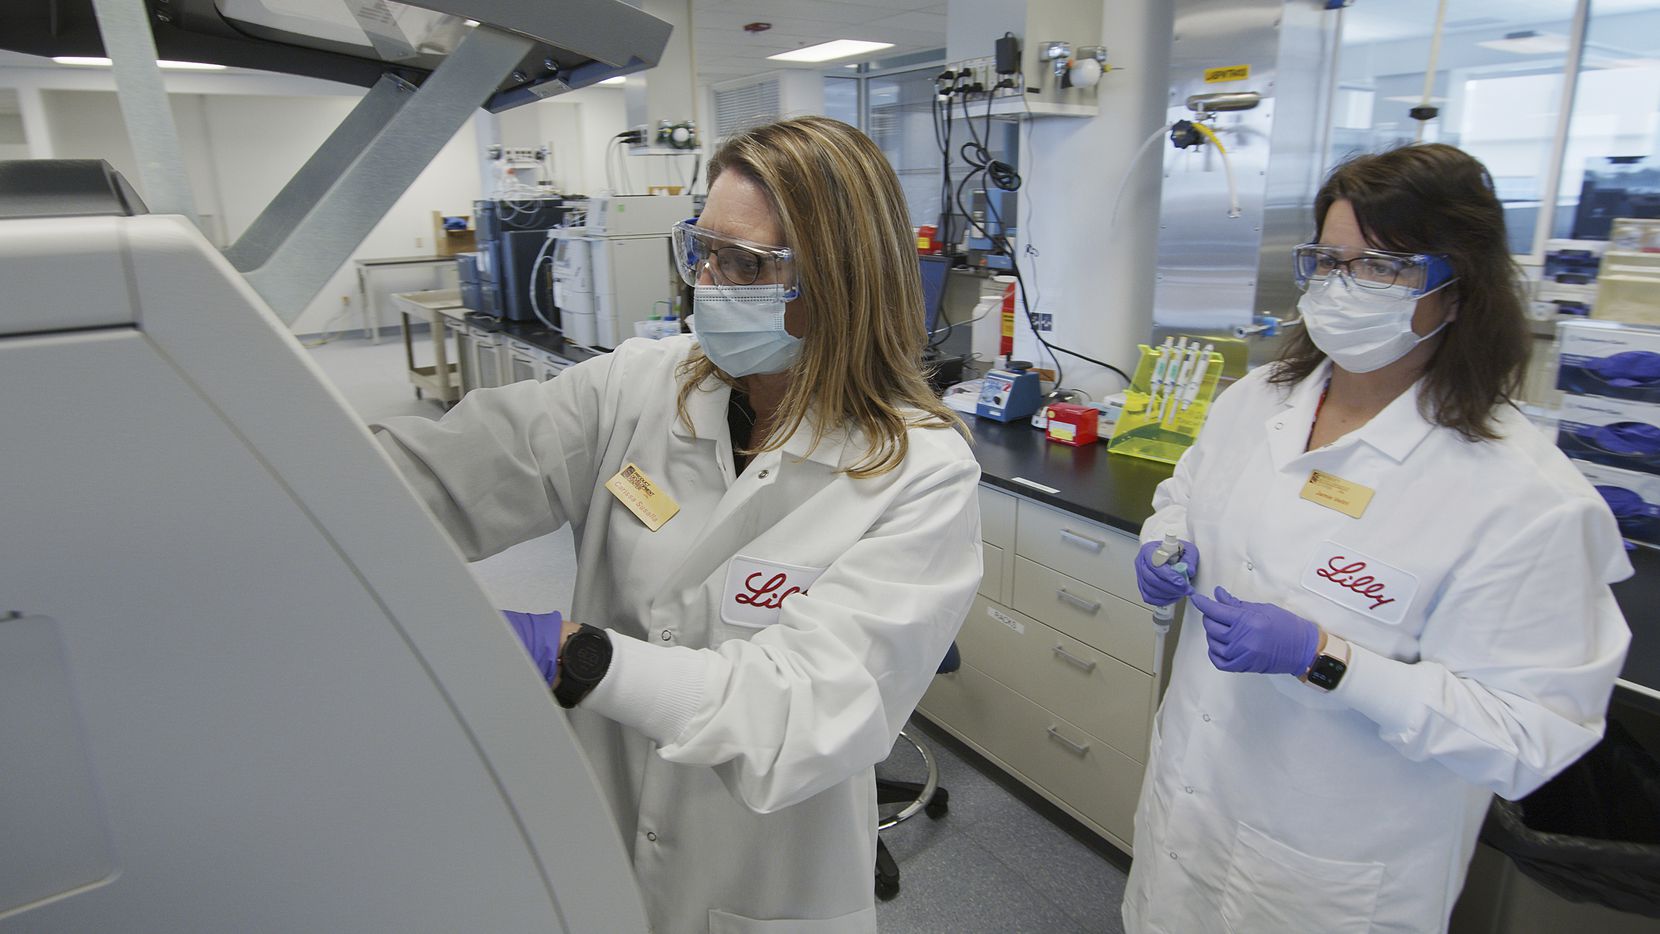 Eli Lilly researchers prepare cells to produce possible COVID-19 antibodies for testing in a...